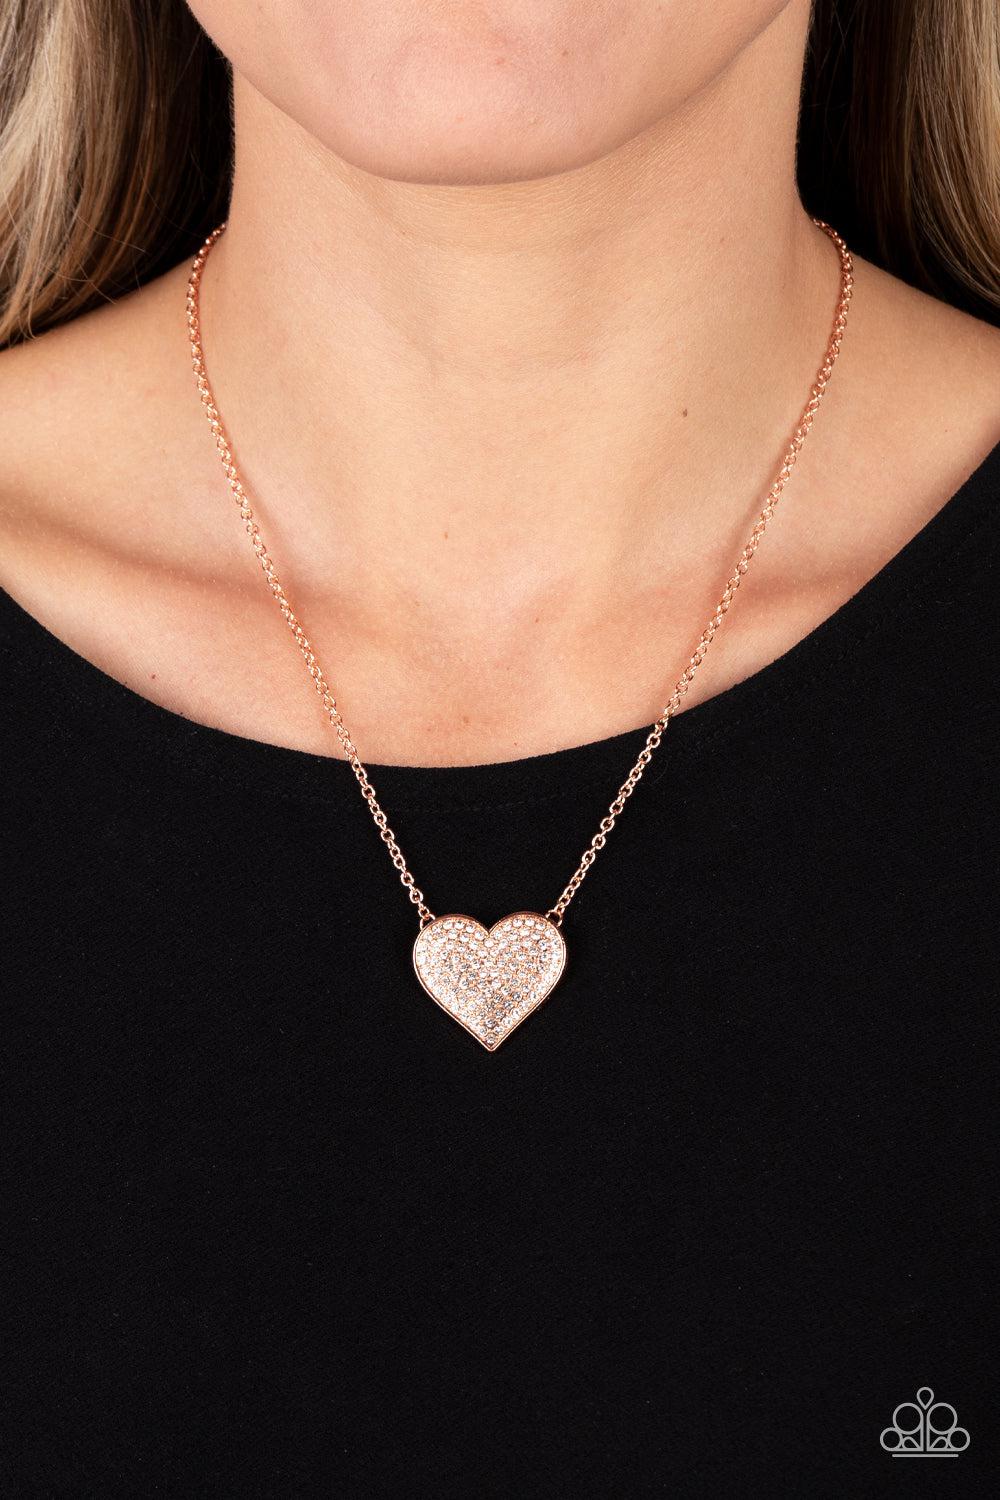 Spellbinding Sweetheart Copper & White Rhinestone Heart Necklace - Paparazzi Accessories- lightbox - CarasShop.com - $5 Jewelry by Cara Jewels